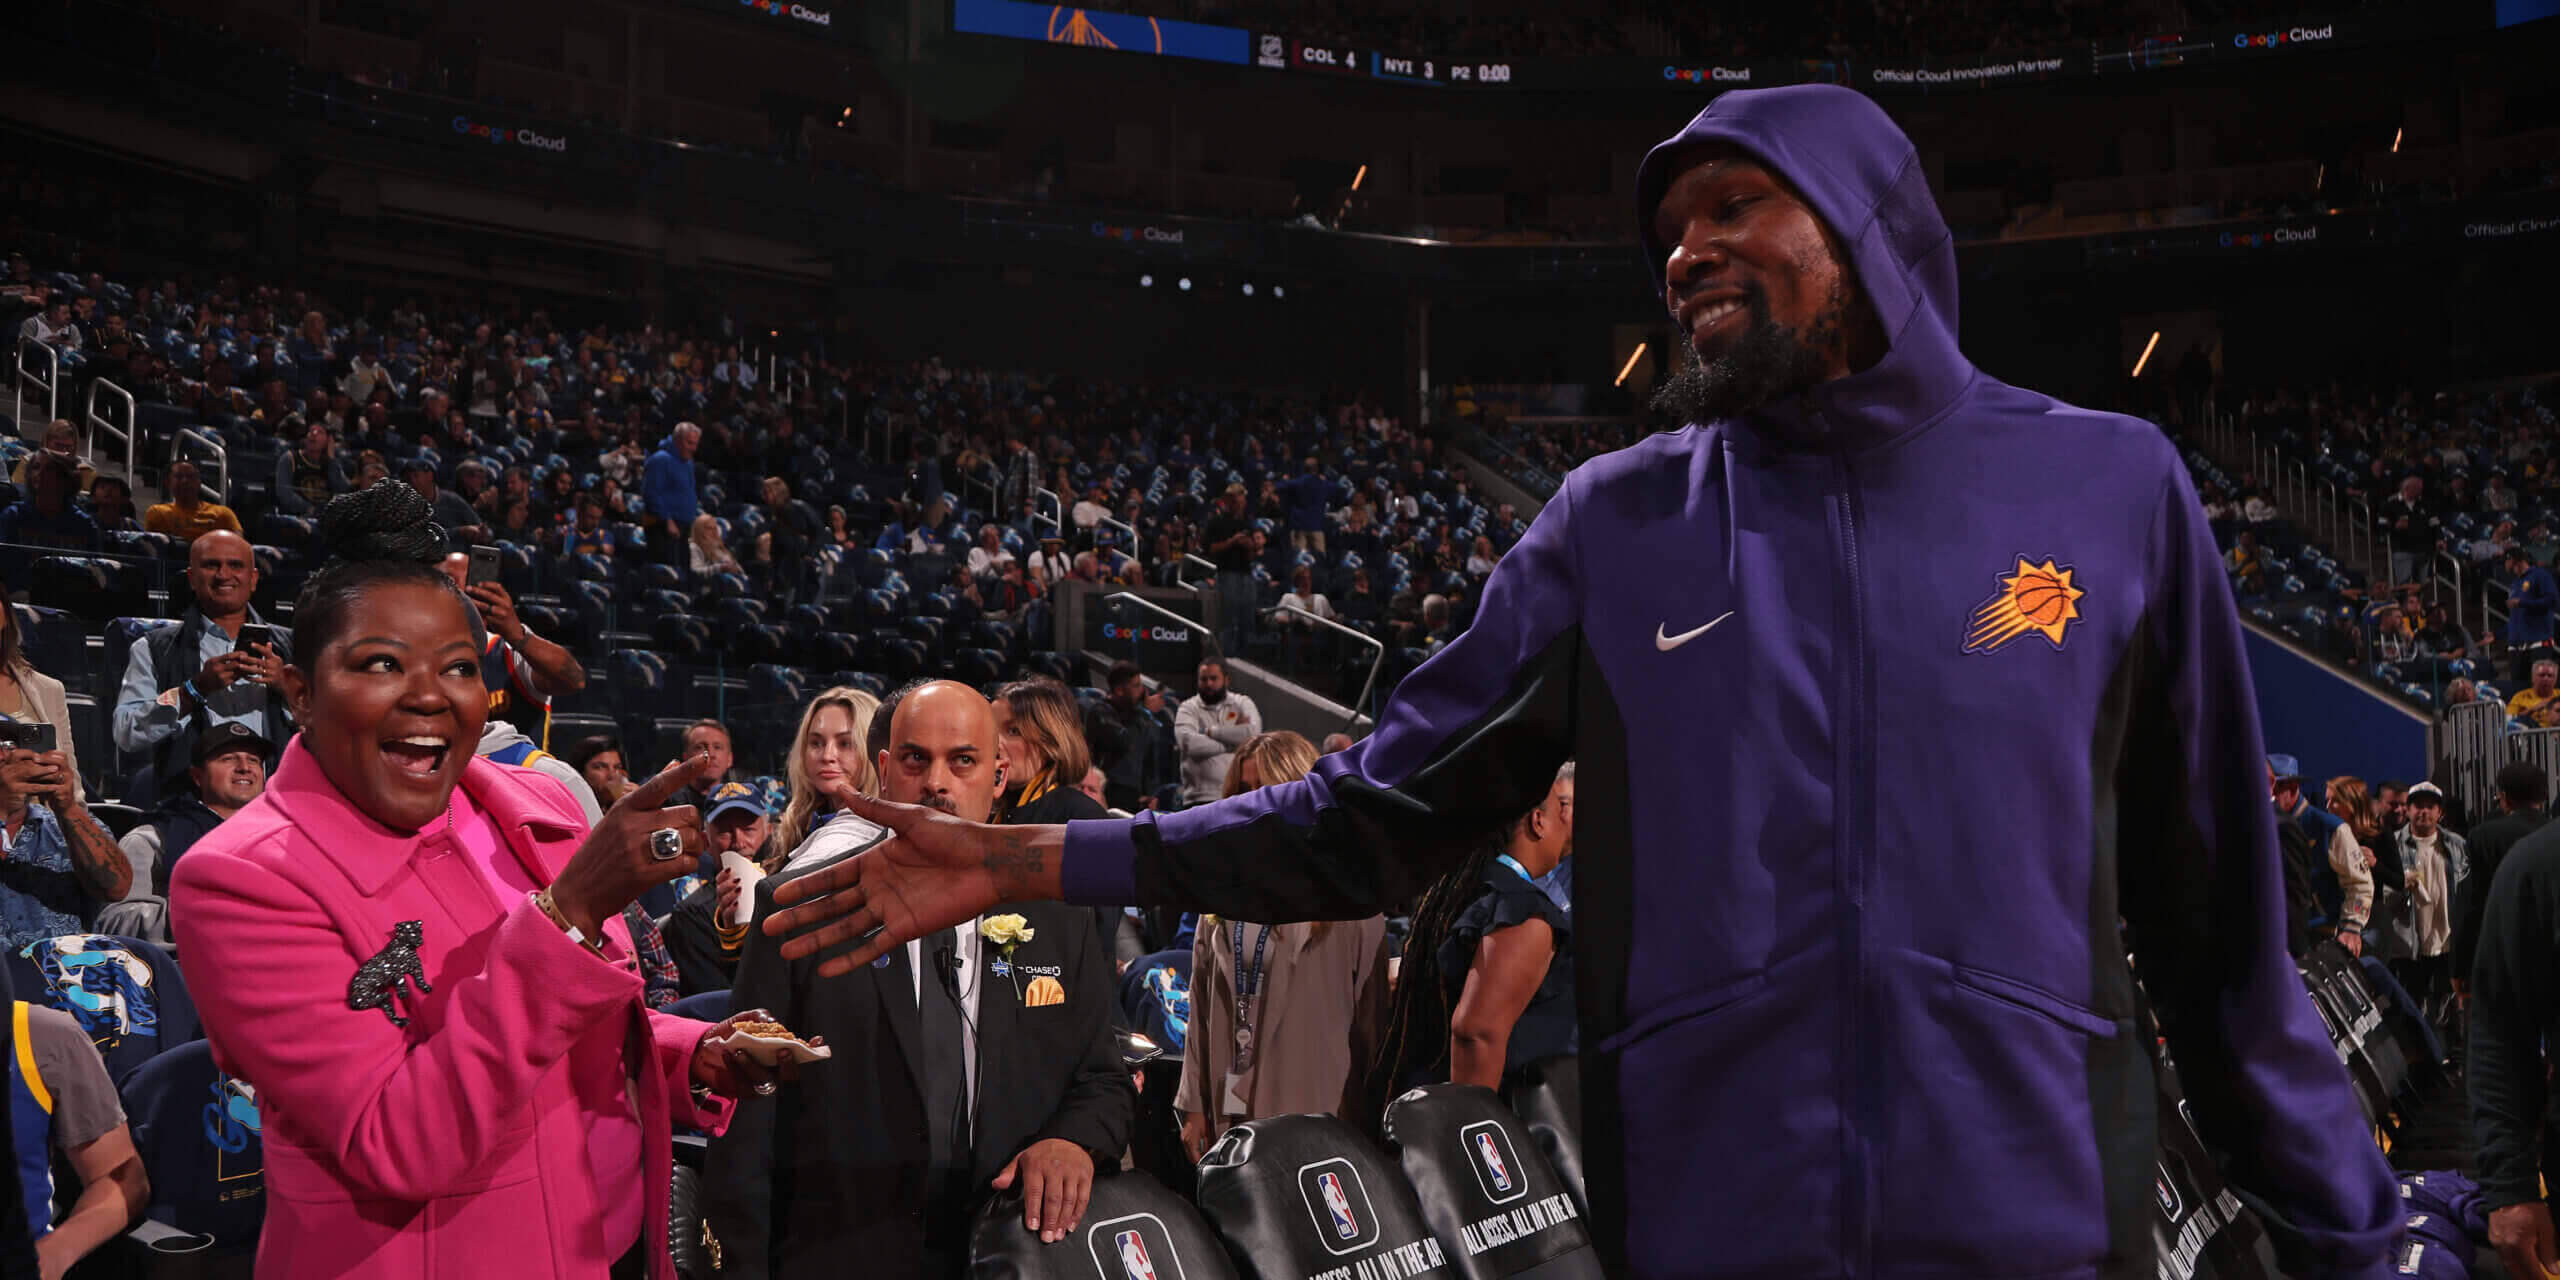 10 years after Kevin Durant's memorable NBA speech, his mother is still 'The Real MVP'